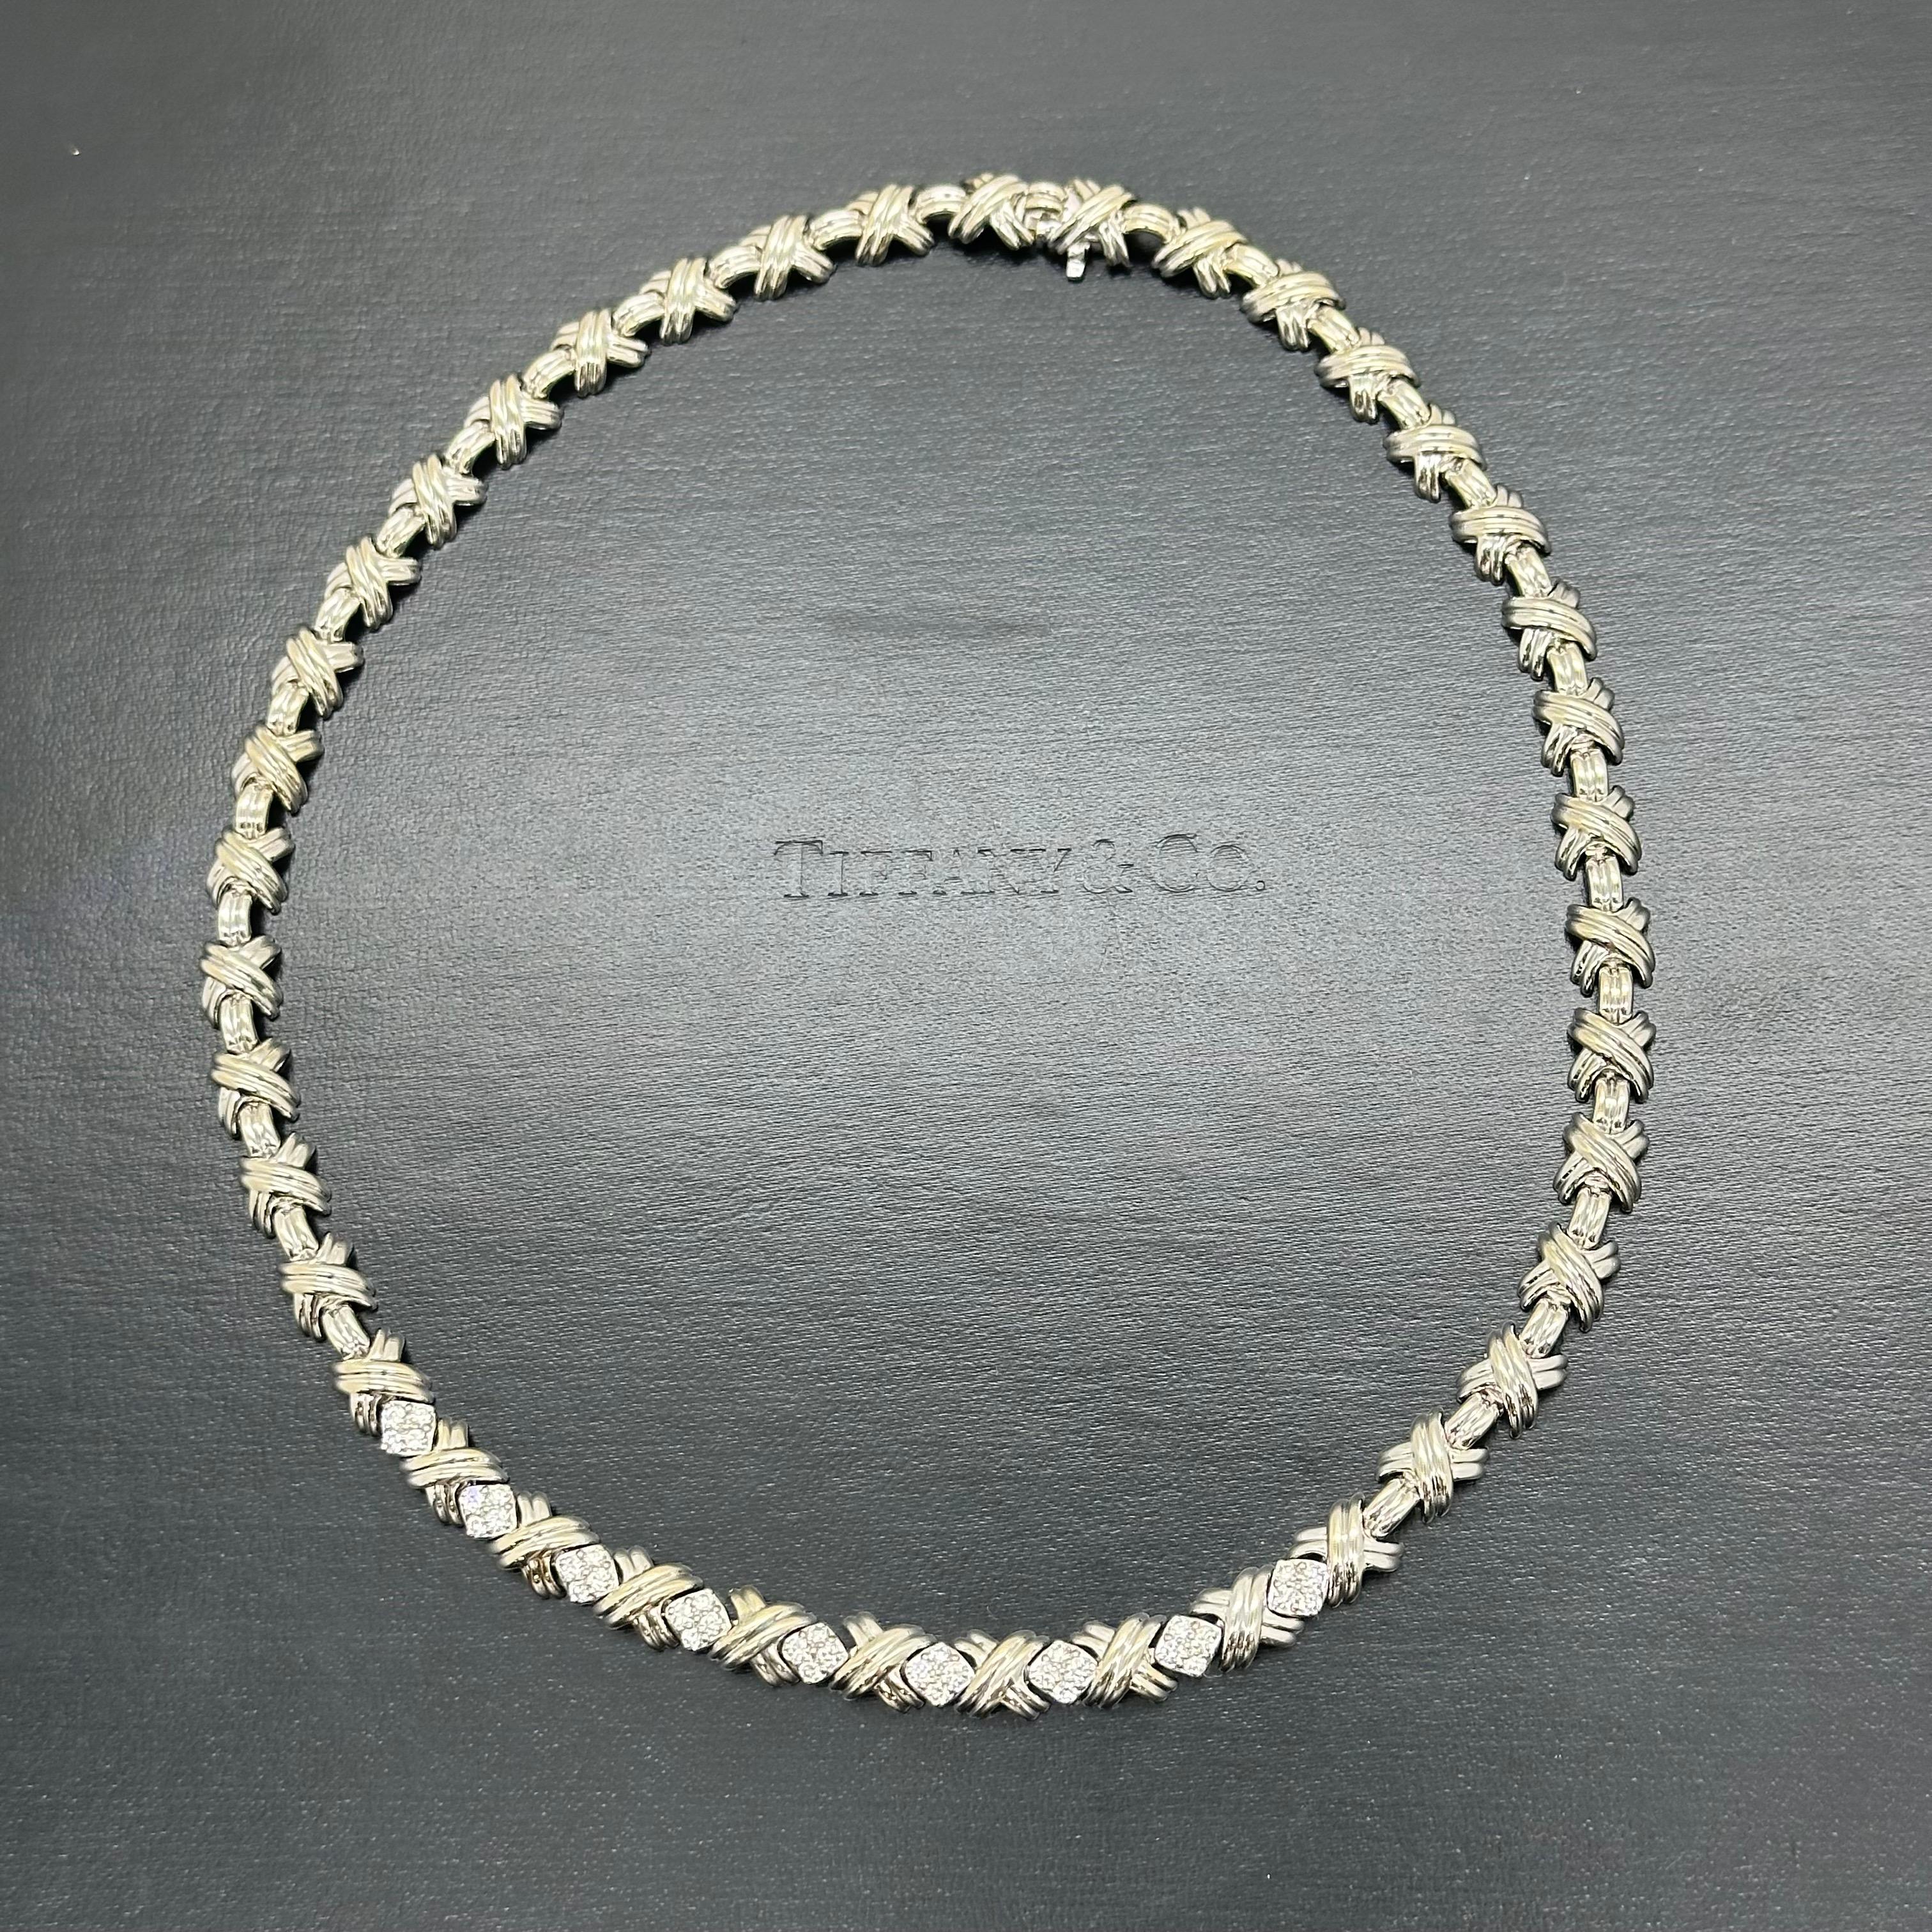 Tiffany & Co. Signature X Diamond Necklace in 18kt White Gold For Sale 1